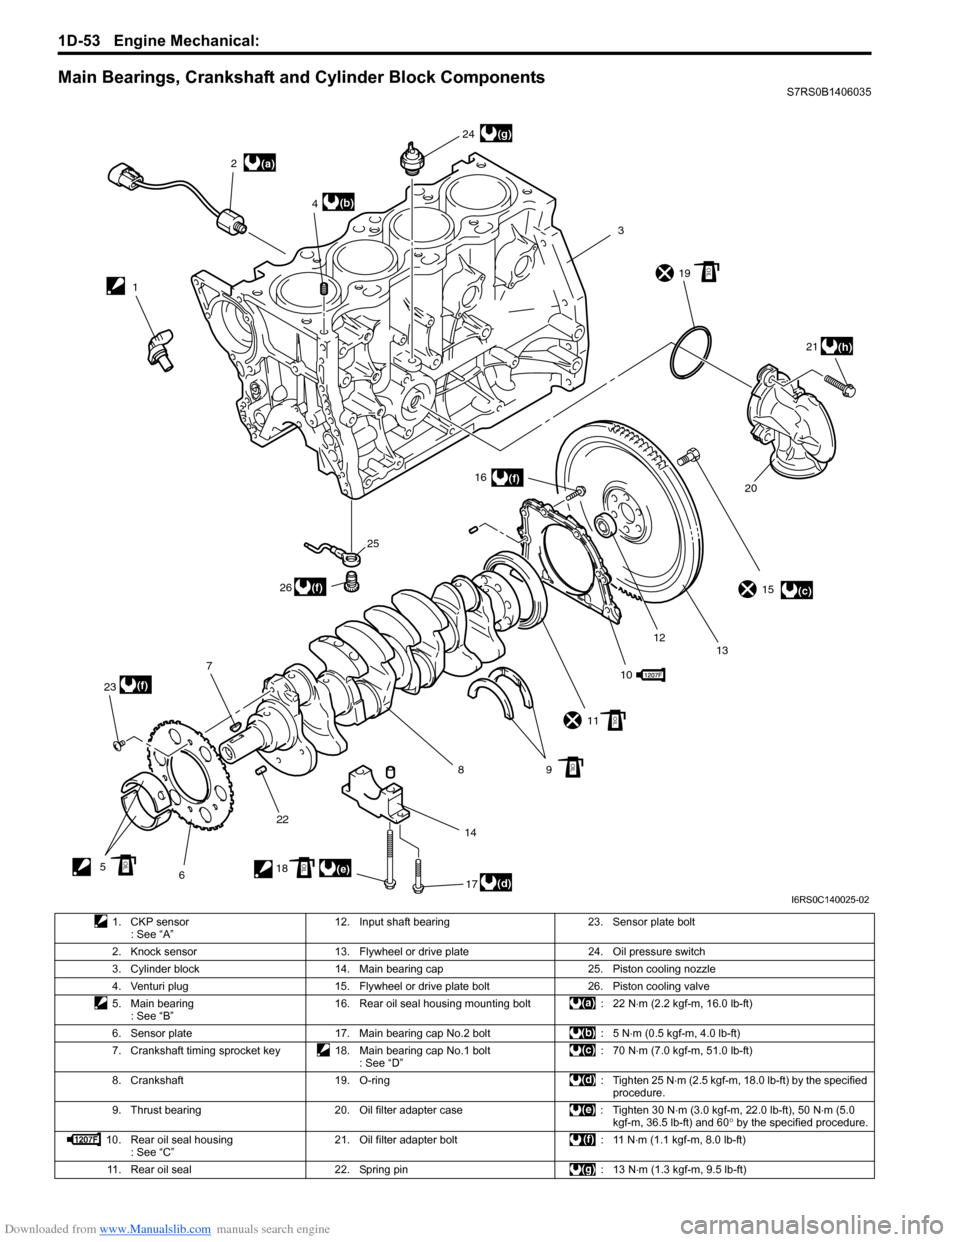 SUZUKI SWIFT 2007 2.G Service User Guide Downloaded from www.Manualslib.com manuals search engine 1D-53 Engine Mechanical: 
Main Bearings, Crankshaft and Cylinder Block ComponentsS7RS0B1406035
(a)
(c)
(d)(e)
(b)
(f)
(f)
(f)
(g)
(h)
12
3
4
5 